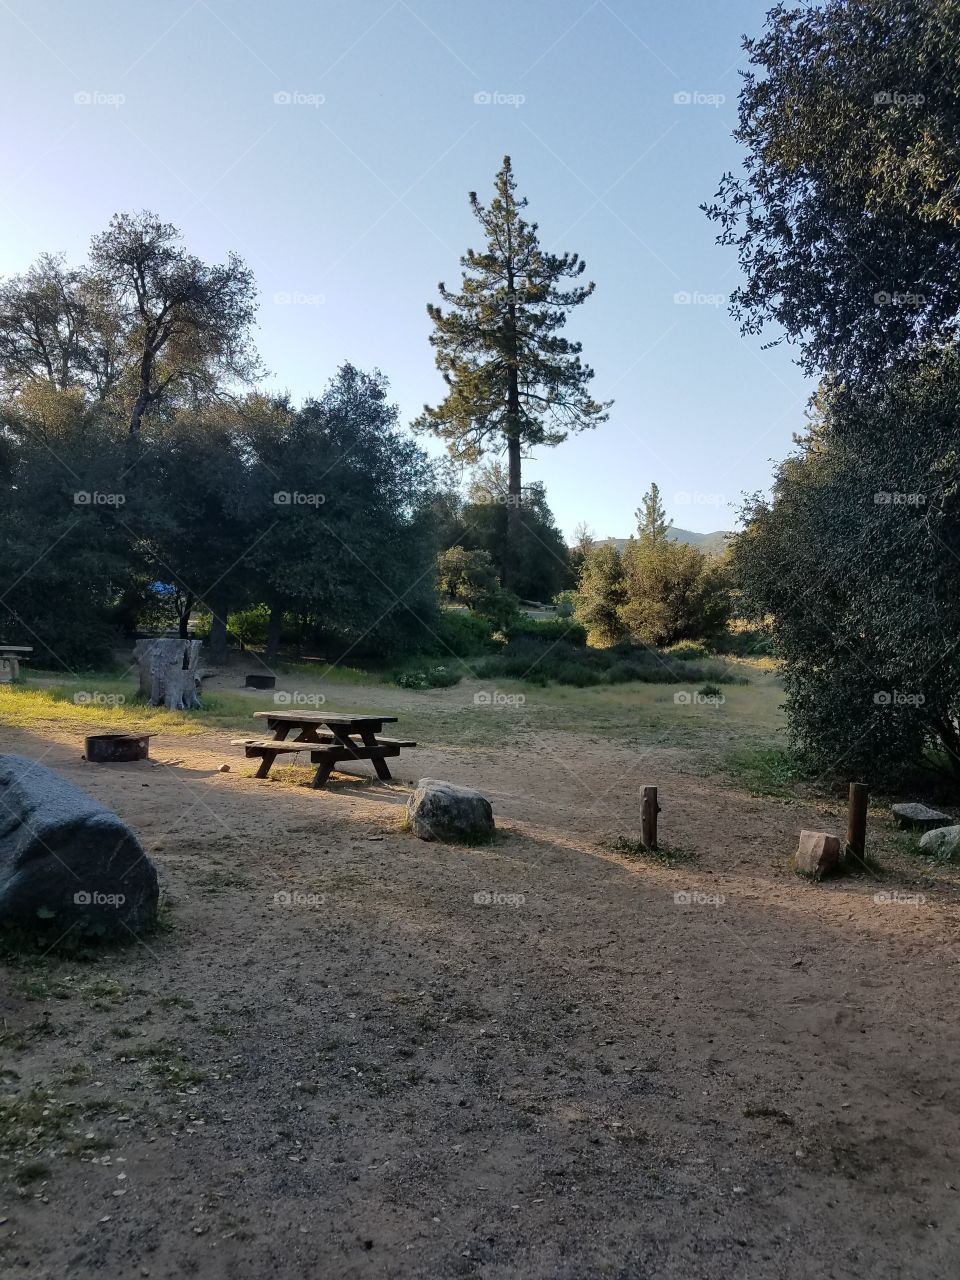 camp, camping, bench, picnic, park, trees, sunlight, tranquil, peaceful  nature, outdoors